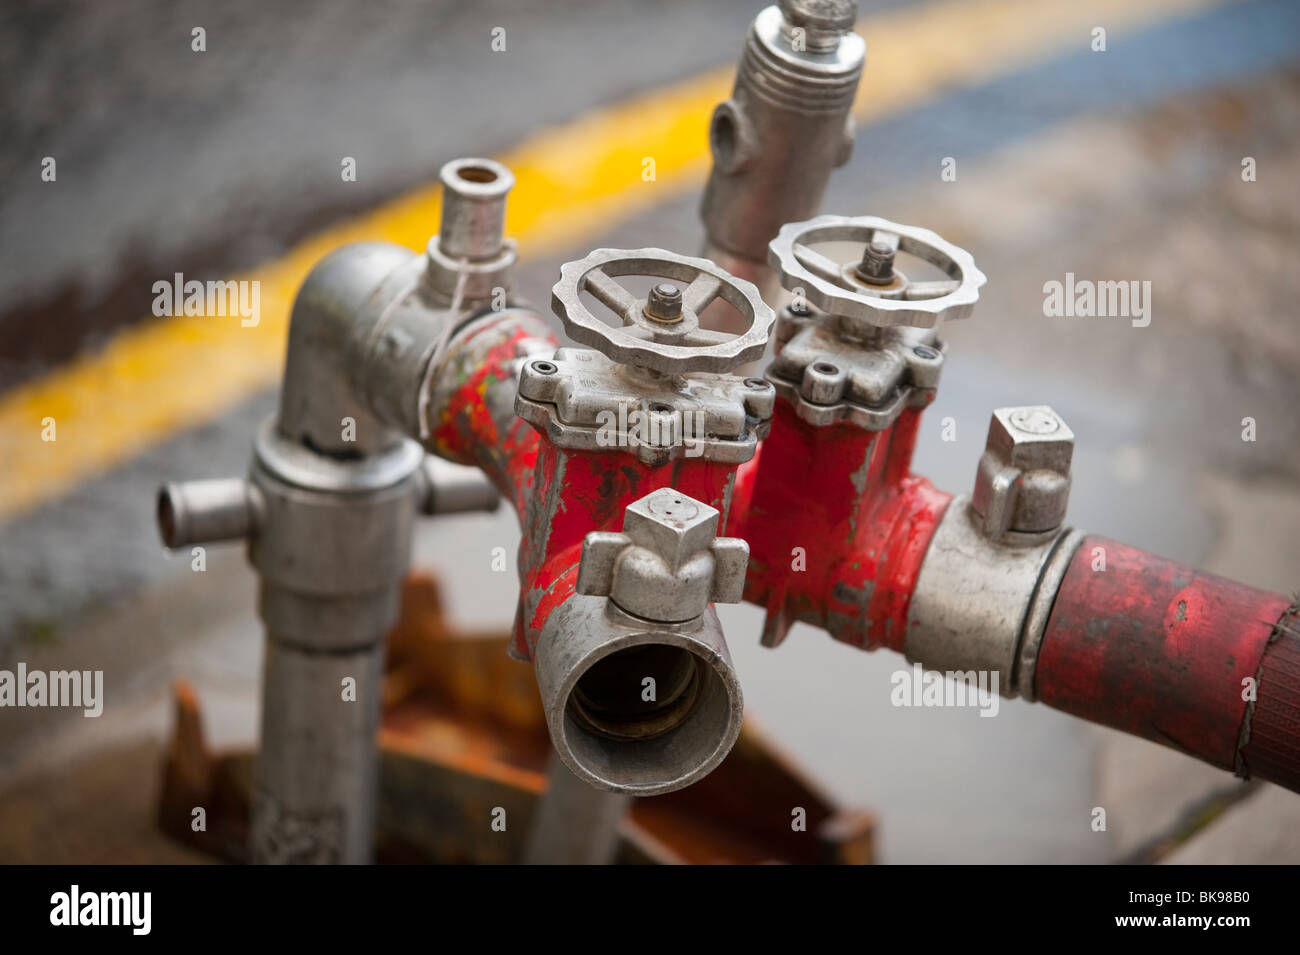 Fire Hydrant stand pipe with dividing branch and hose Stock Photo